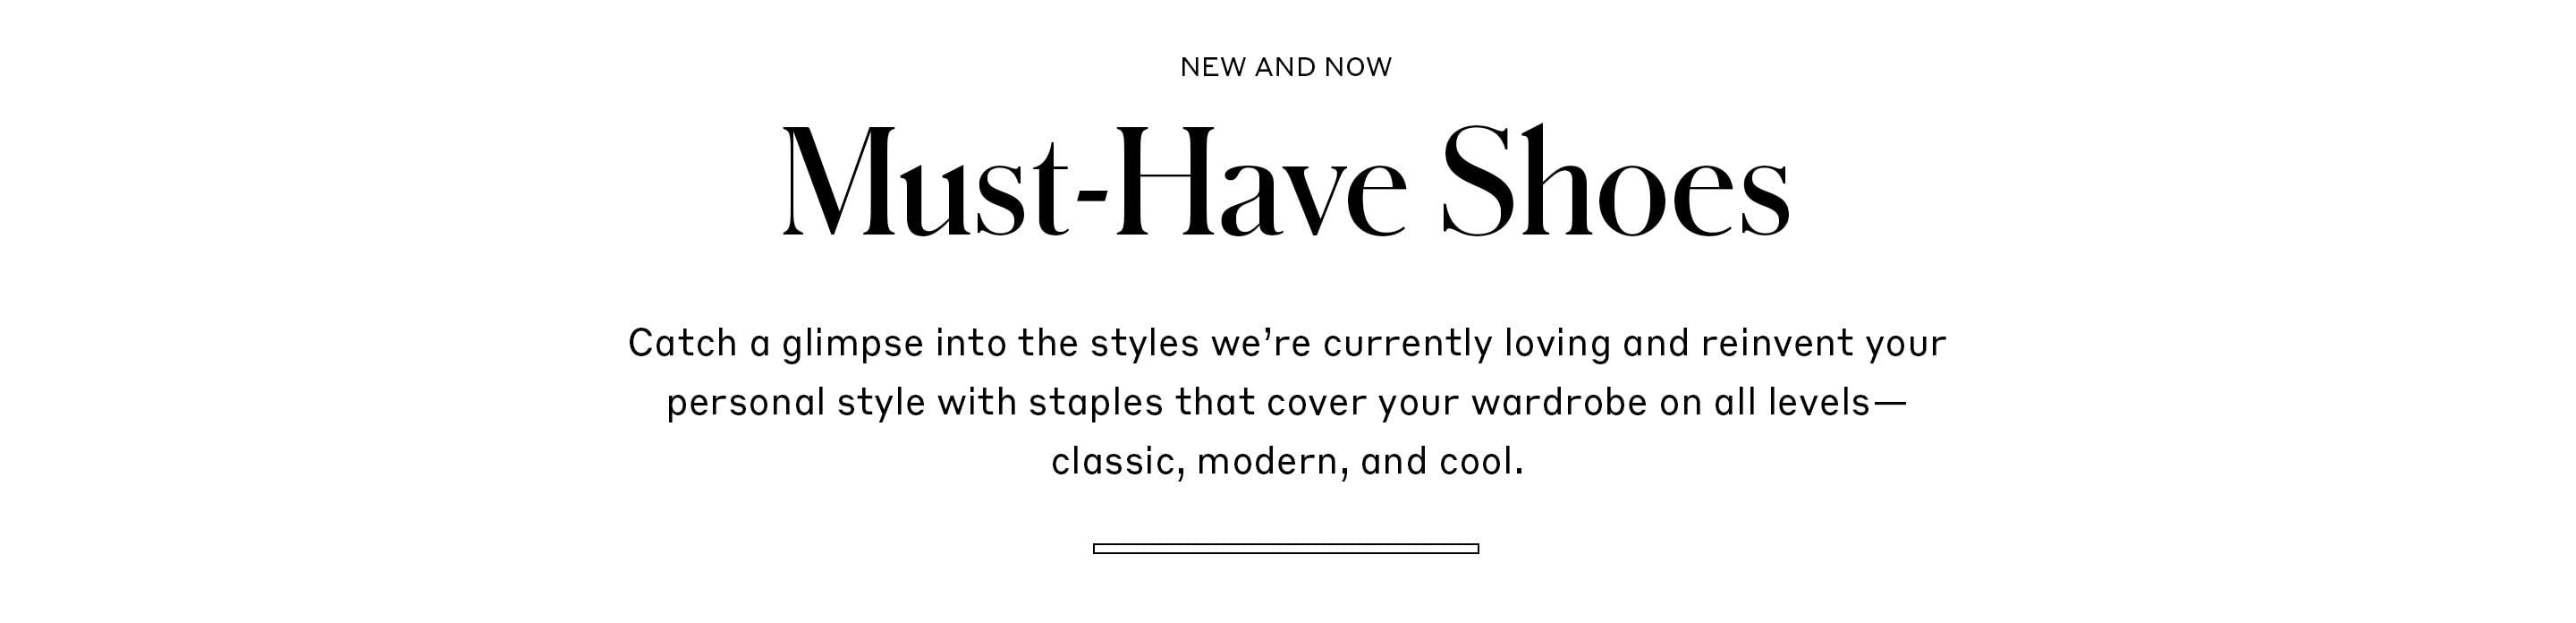 Must-Have Shoes - Catch a glimpse into the styles we’re currently loving and reinvent your personal style with staples that cover your wardrobe on all levels—classic, modern, and cool.